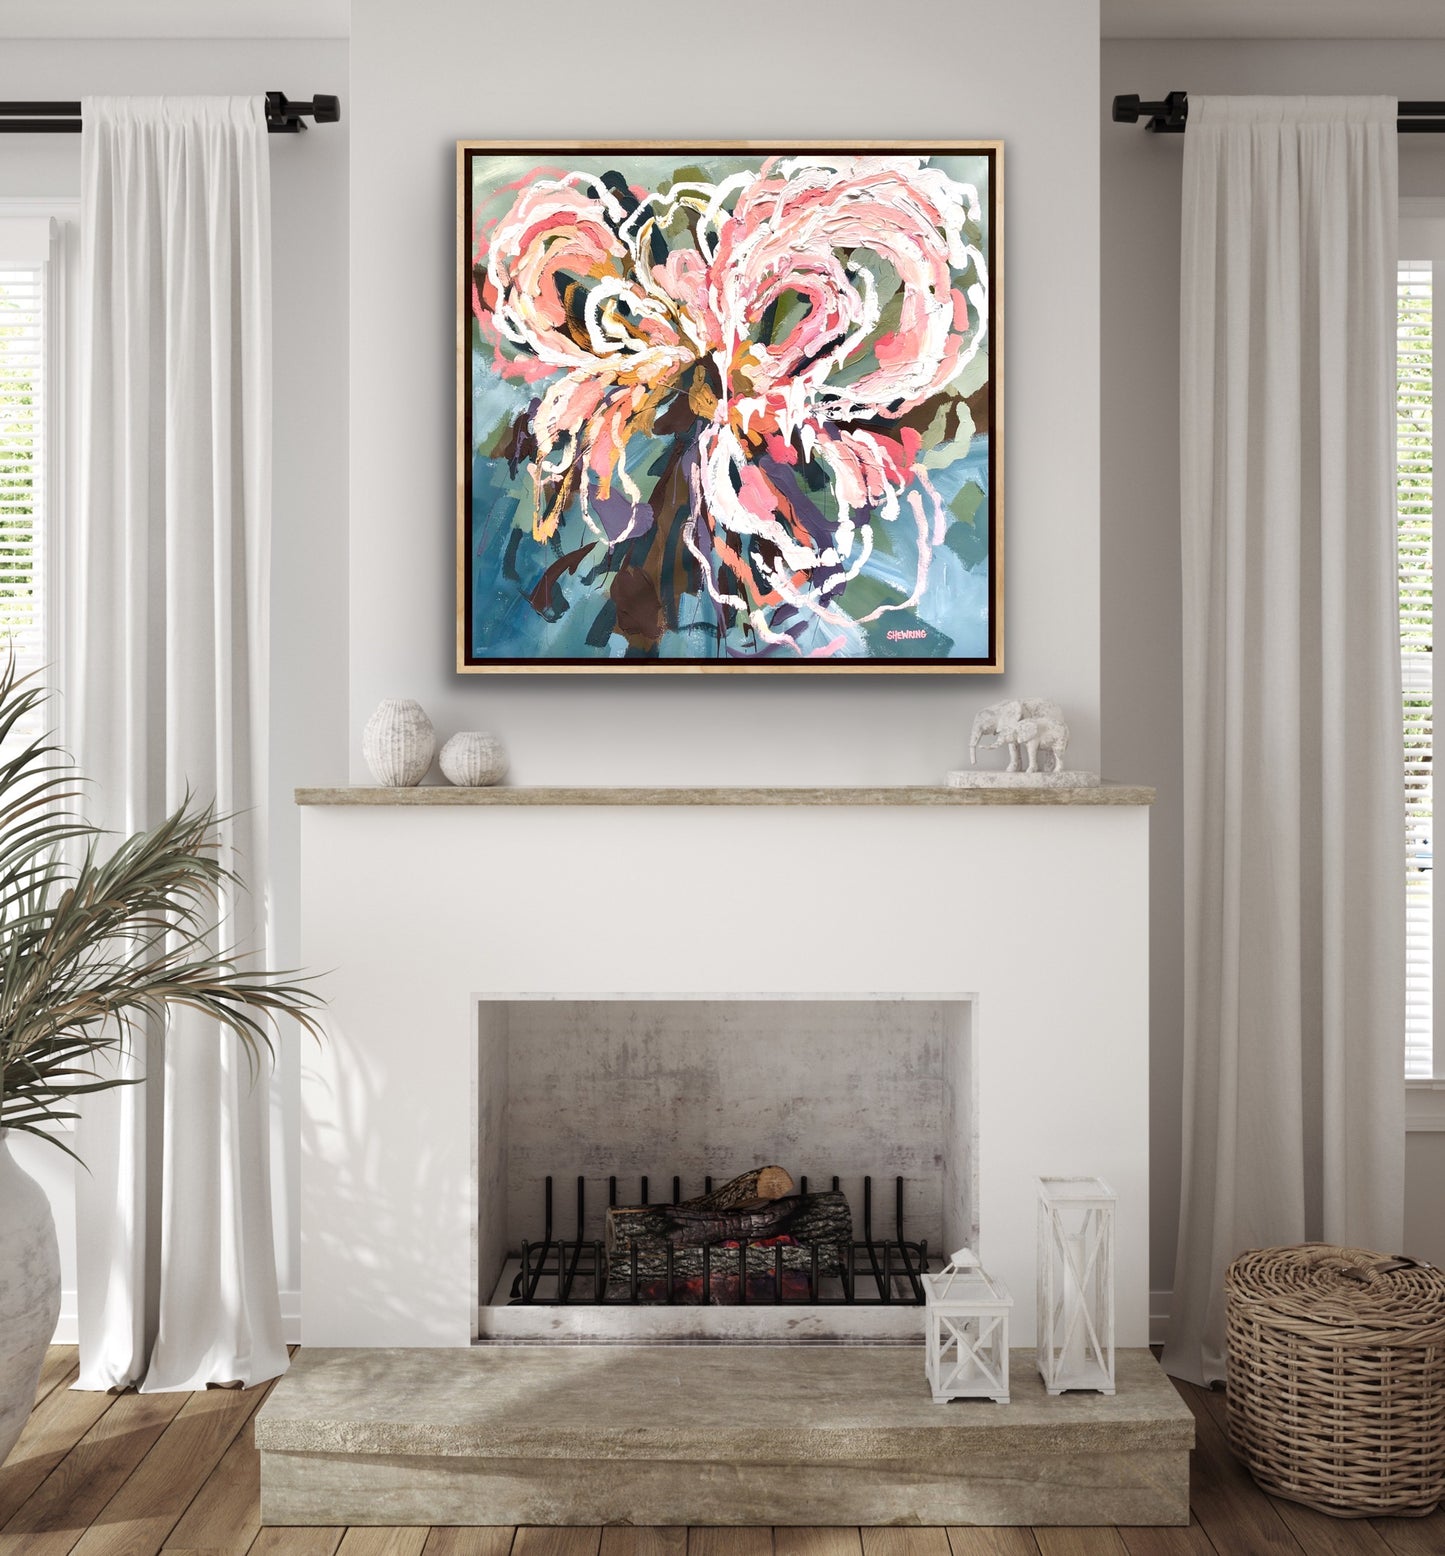 Love Passion 87x84cm (or can be 84x84cm) FRAMED SOLD